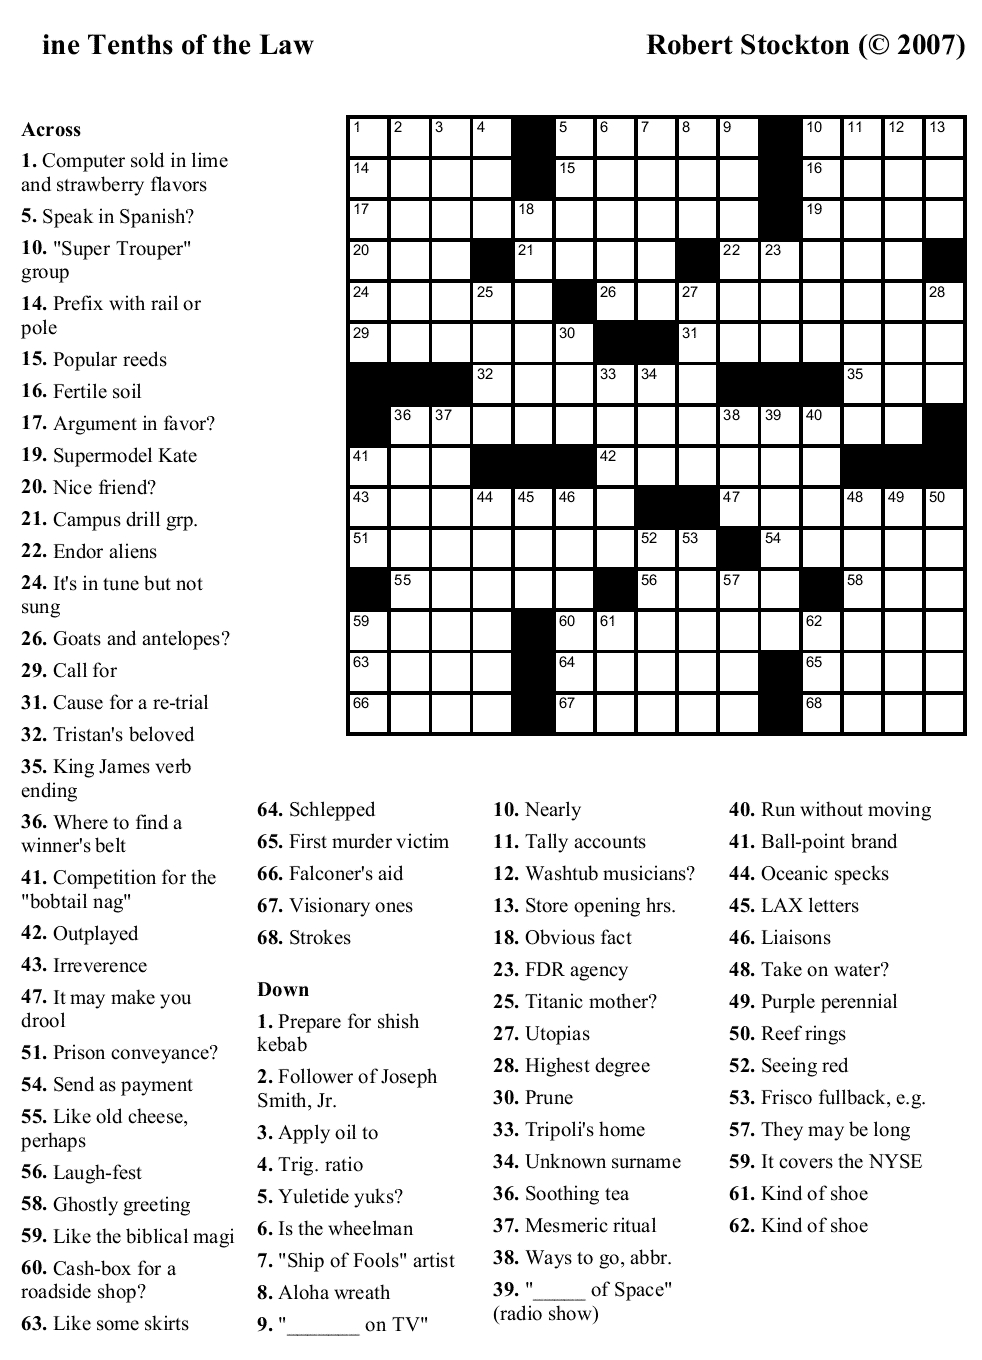 Crossword Puzzles Printable - Yahoo Image Search Results | Crossword - Printable Crossword #1